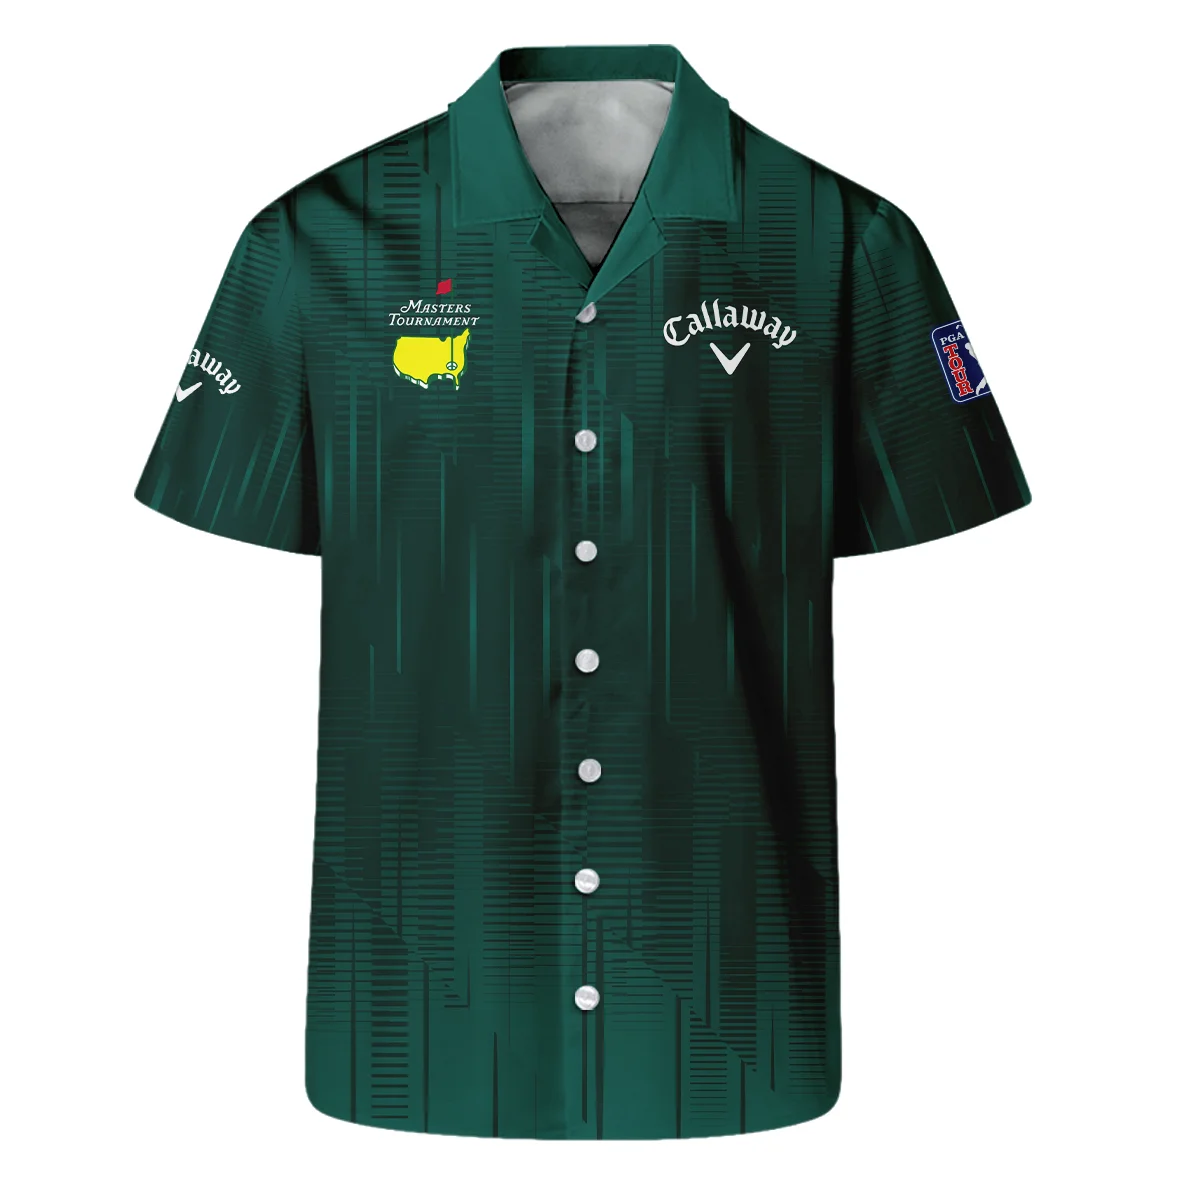 Masters Tournament Callaway Dark Green Gradient Stripes Pattern Long Polo Shirt Style Classic Long Polo Shirt For Men